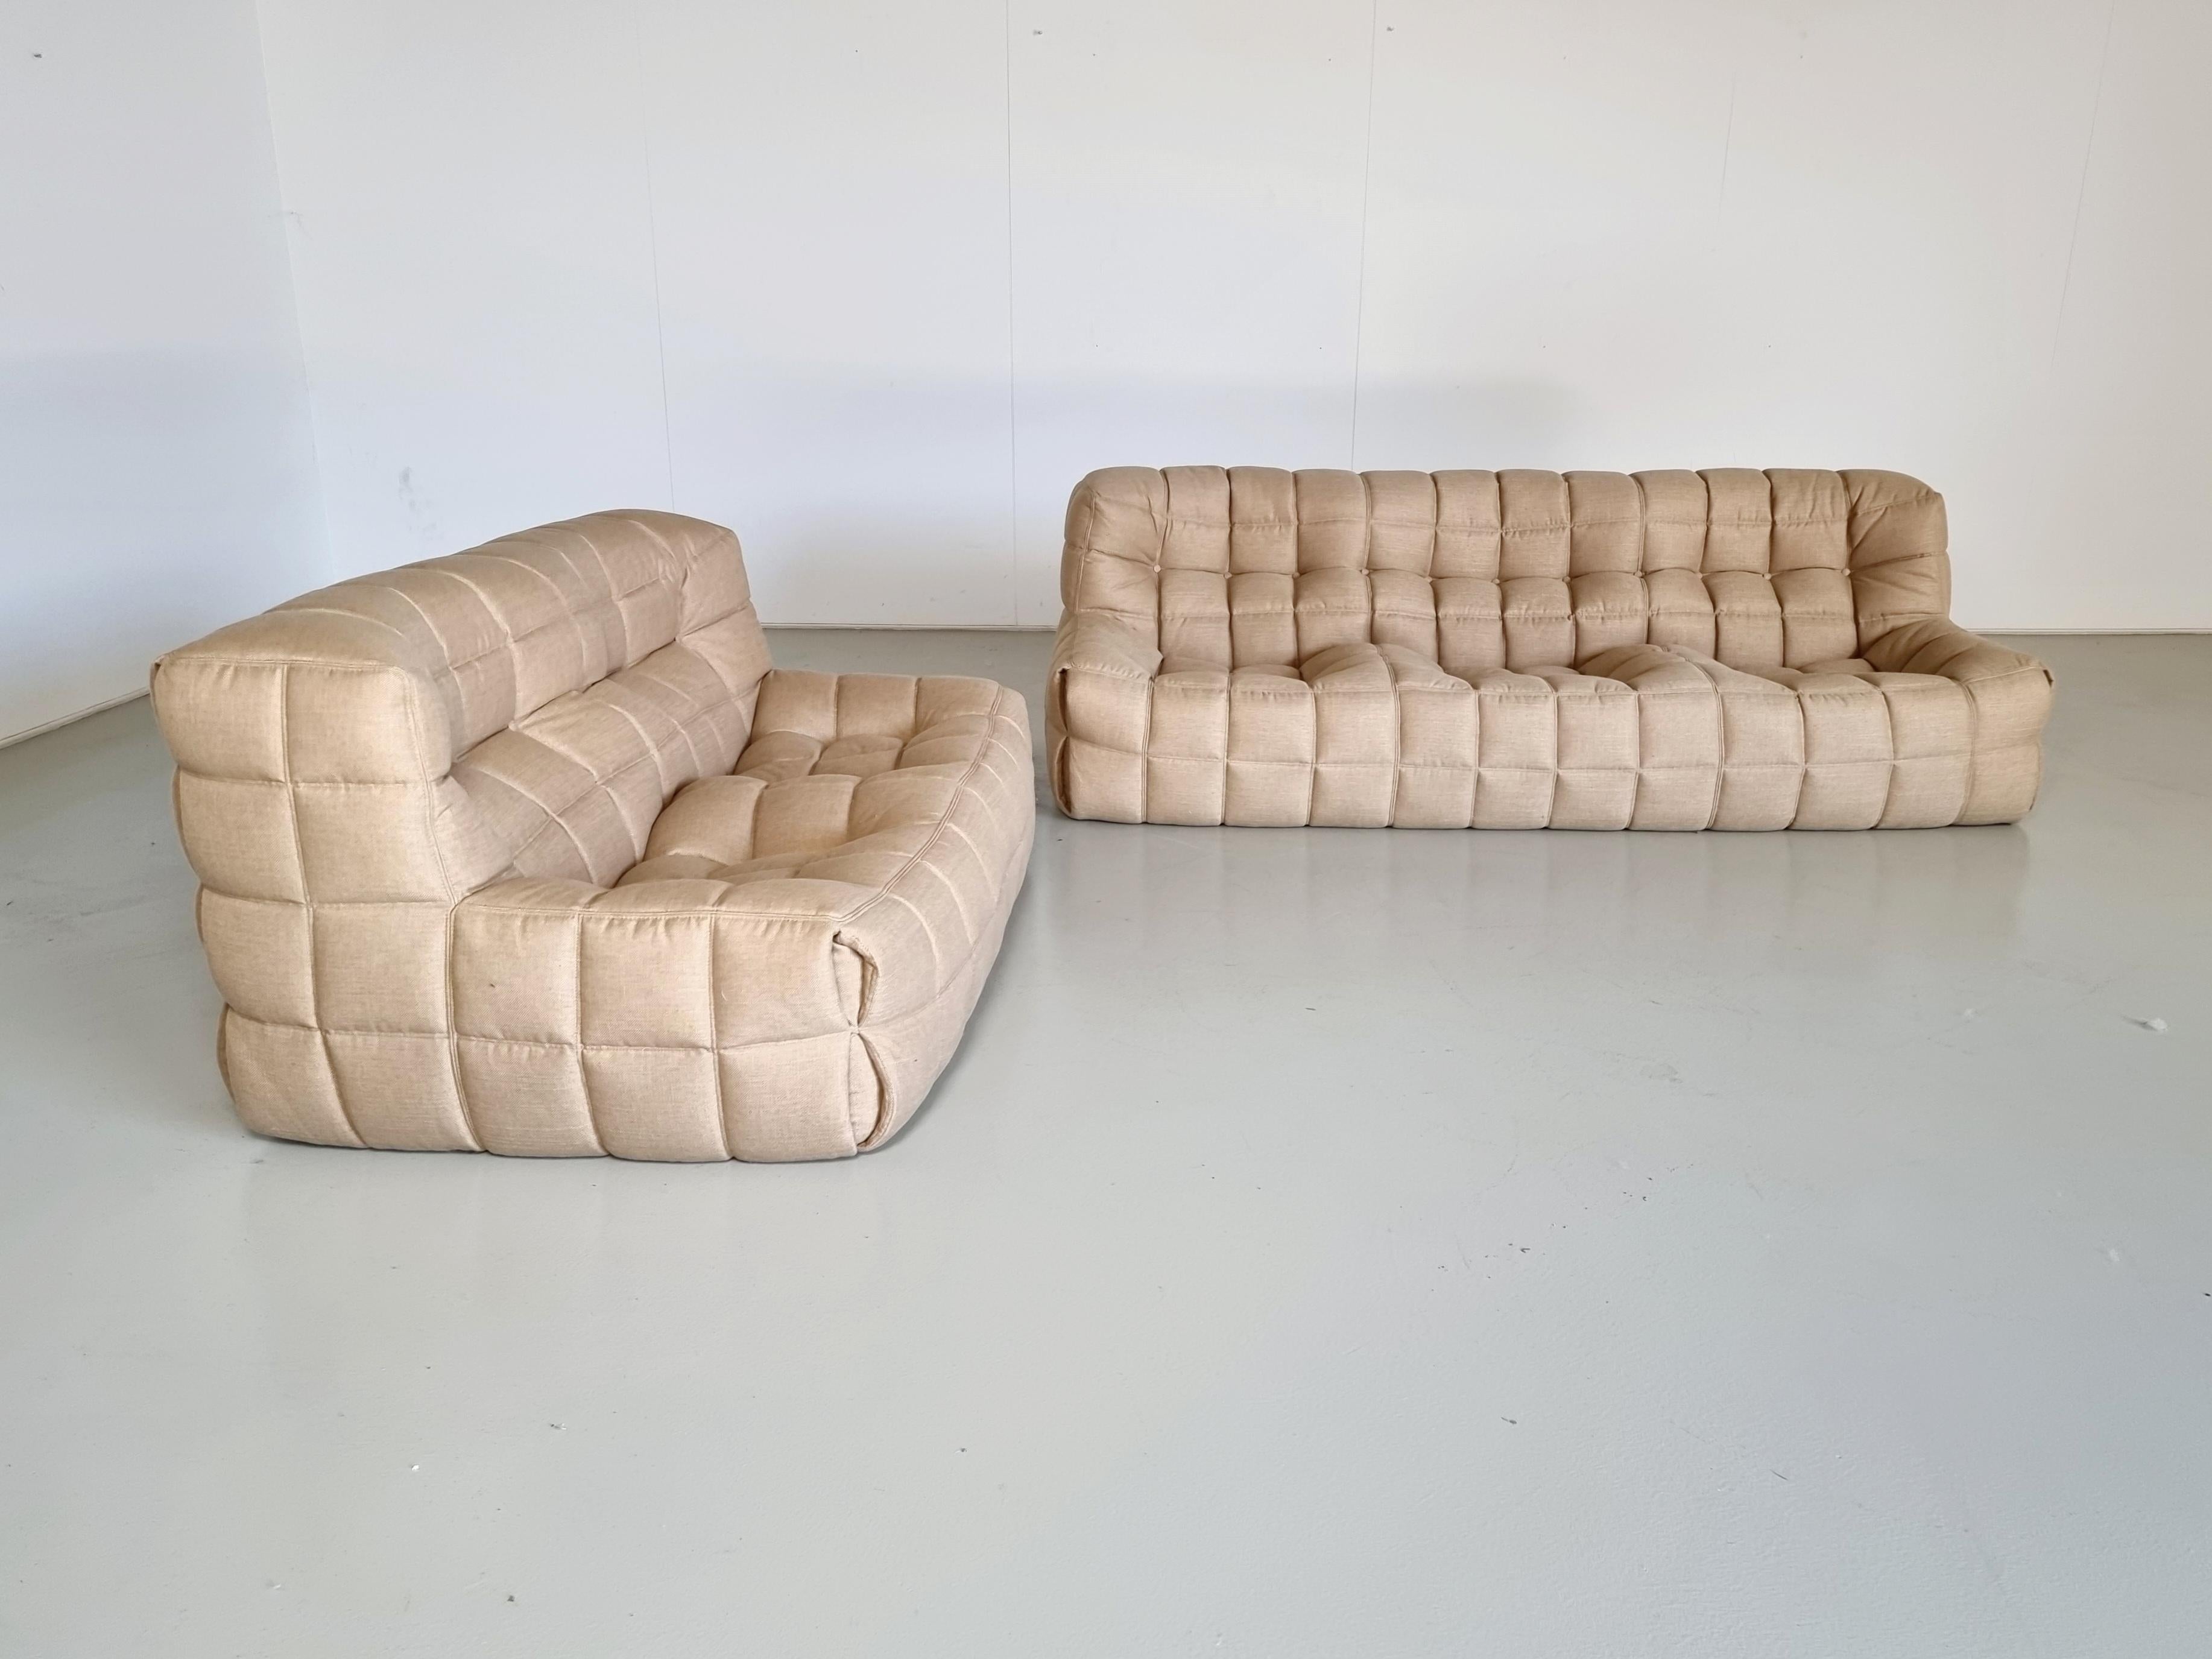 Fabric Kashima 2-Seater Sofa by Michel Ducaroy for Ligne Roset, 1970s For Sale